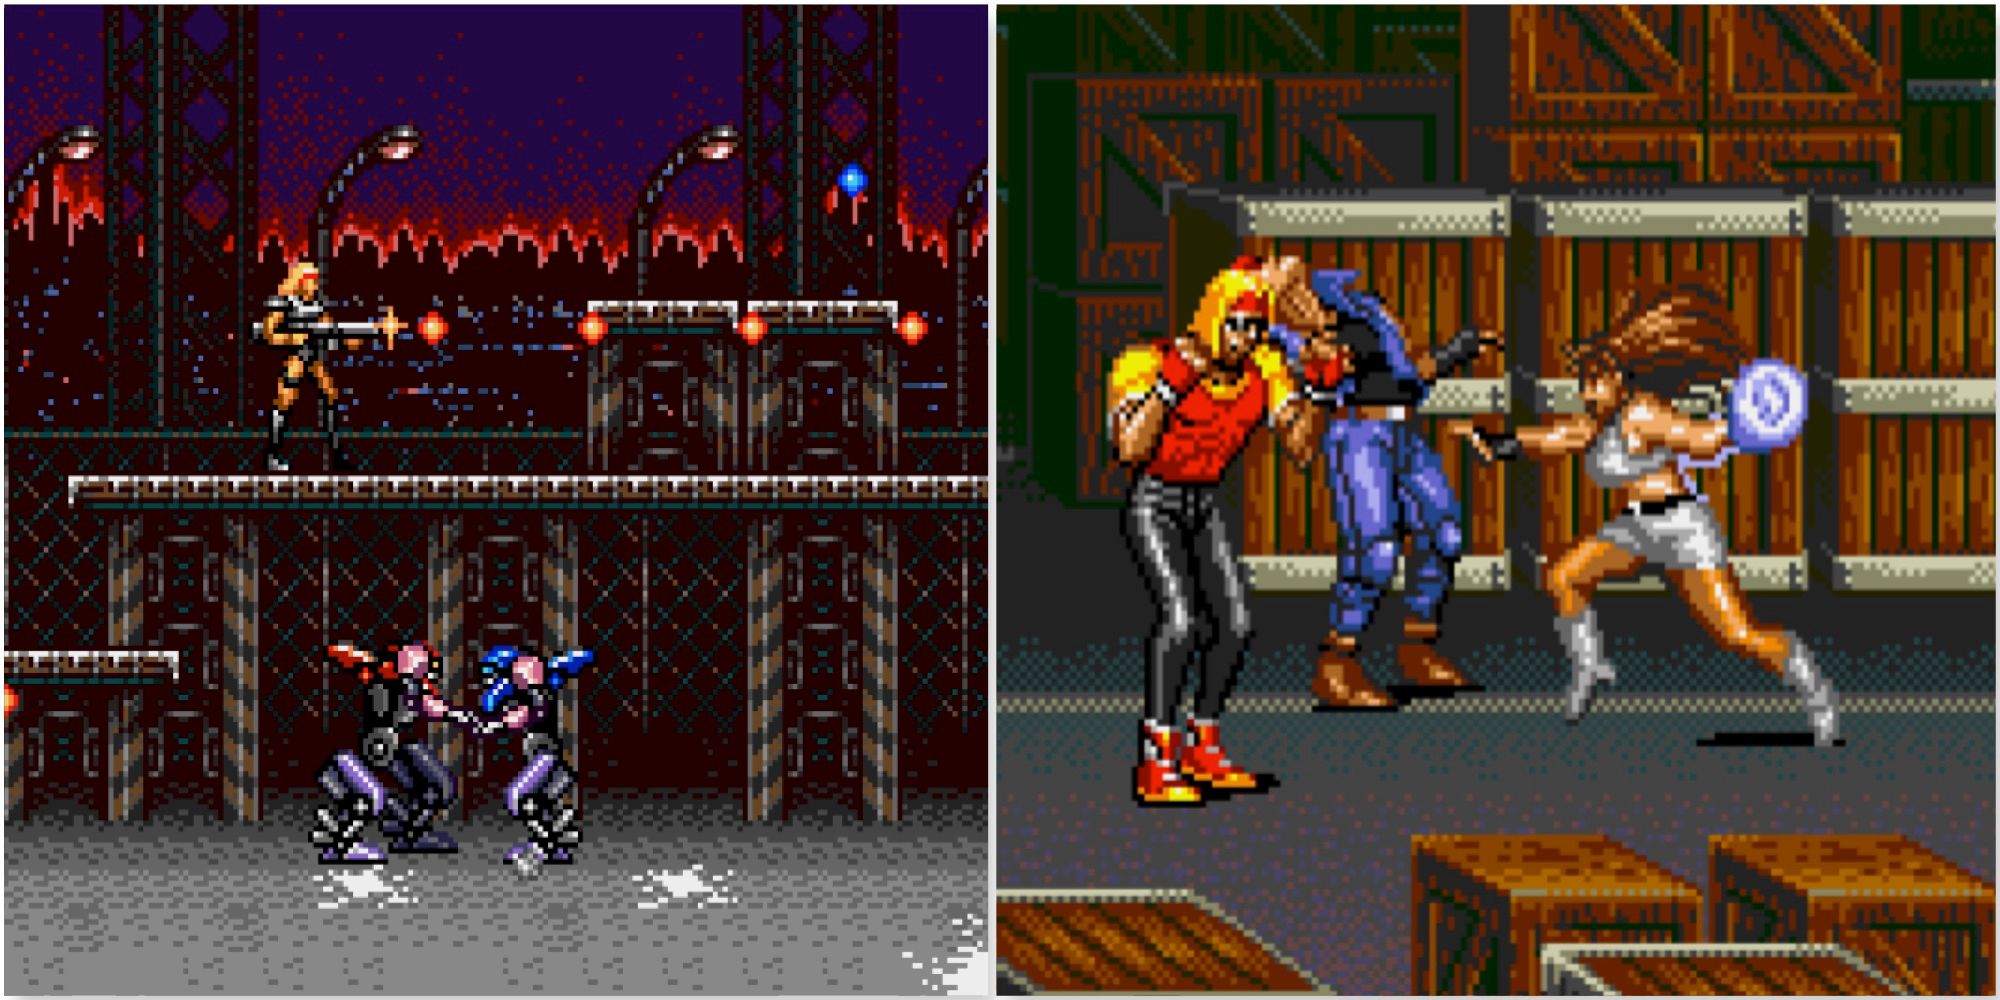 Shooting enemies in Contra Hard Corps and Fighting enemies in Streets Of Rage 3